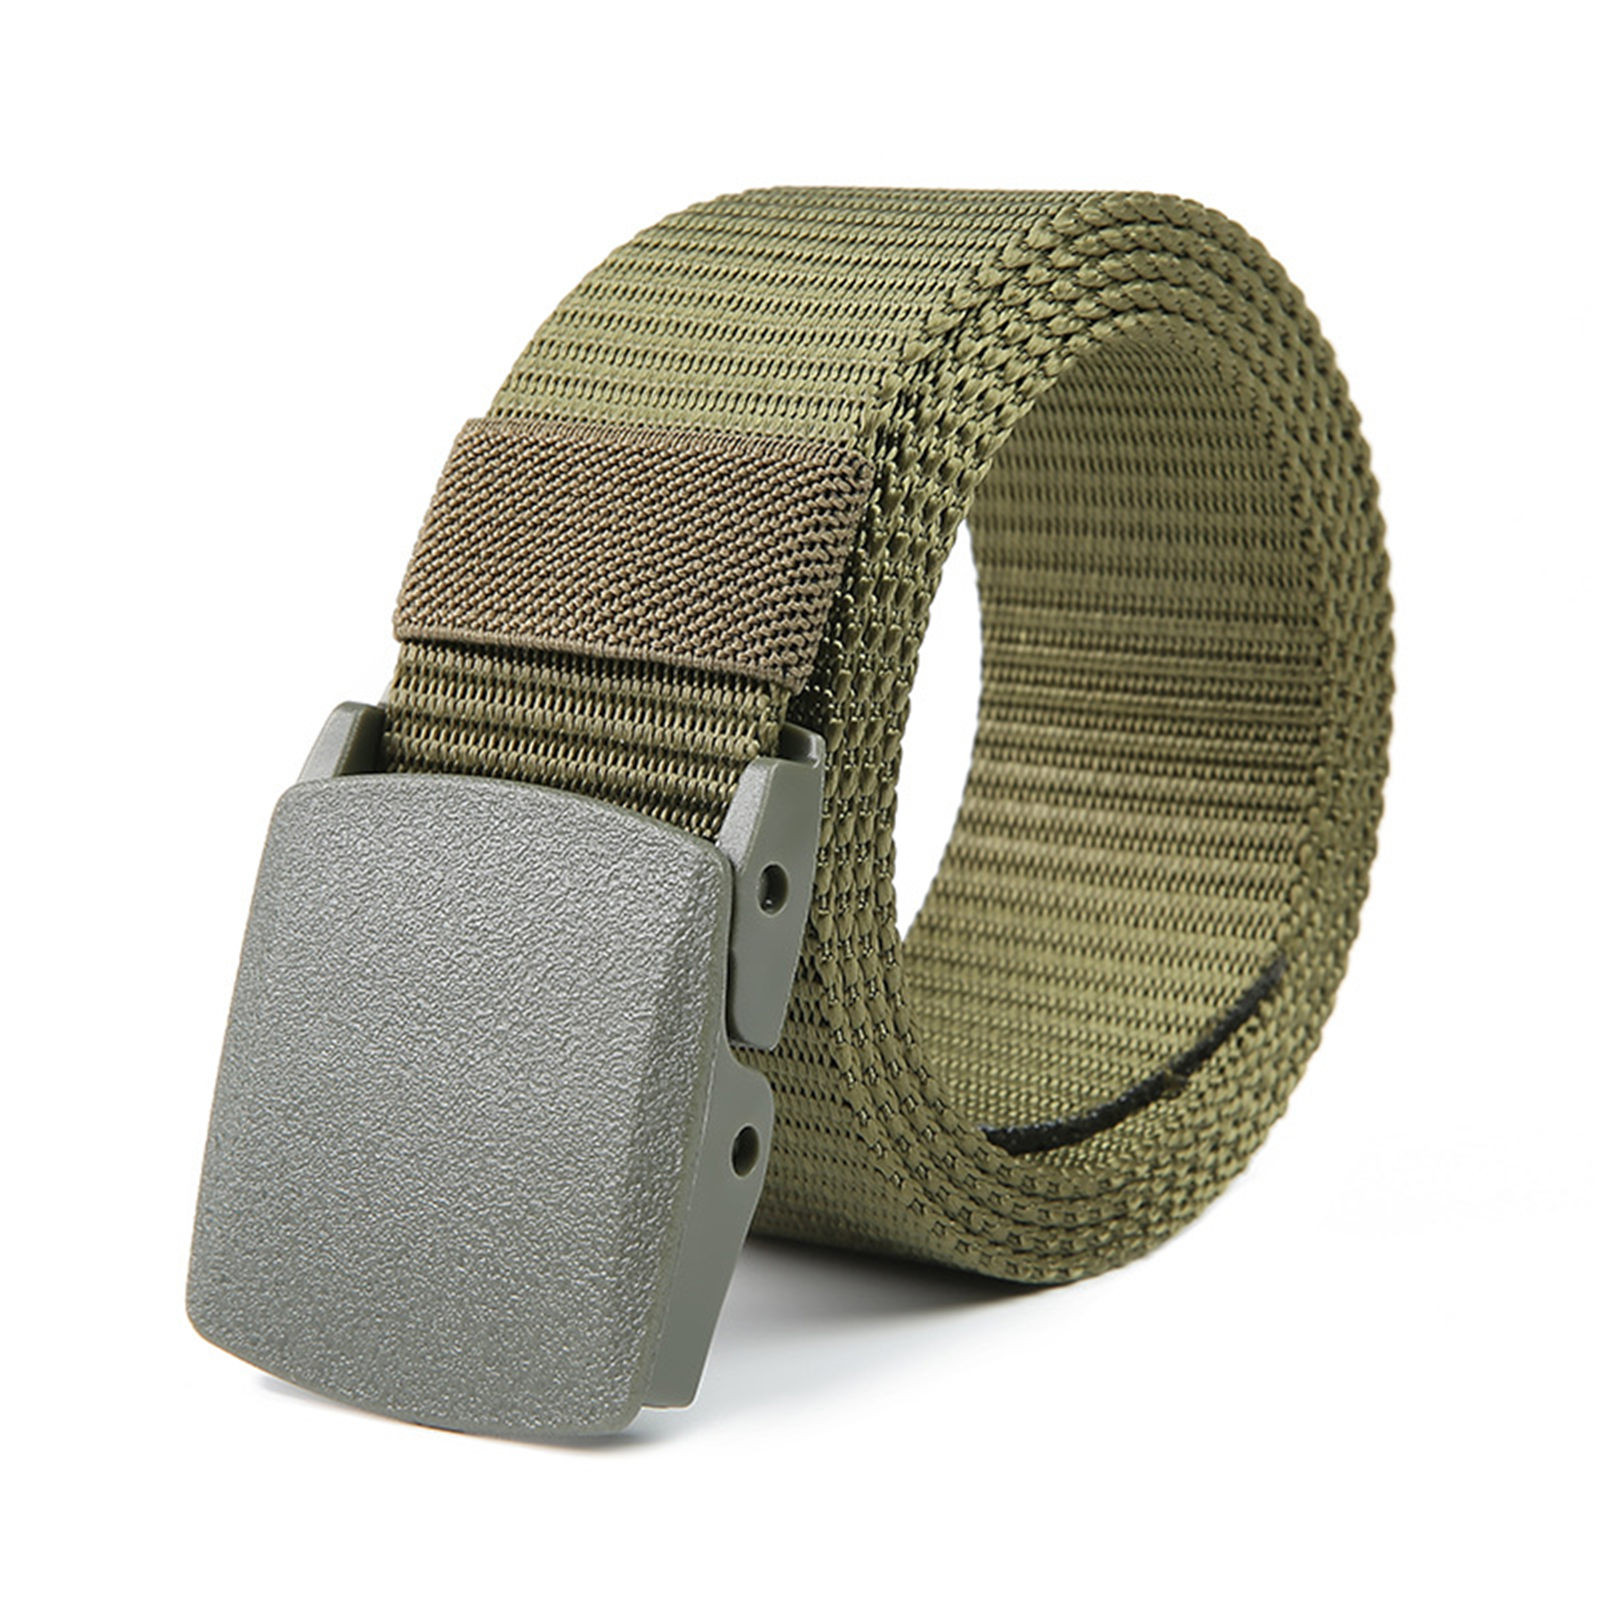 Yubnlvae Belts for Women Mens Adult Unisex Canvas Quick Release Buckle Outer Belt Men's Outdoor Training Belt Belt Army Green - image 2 of 3